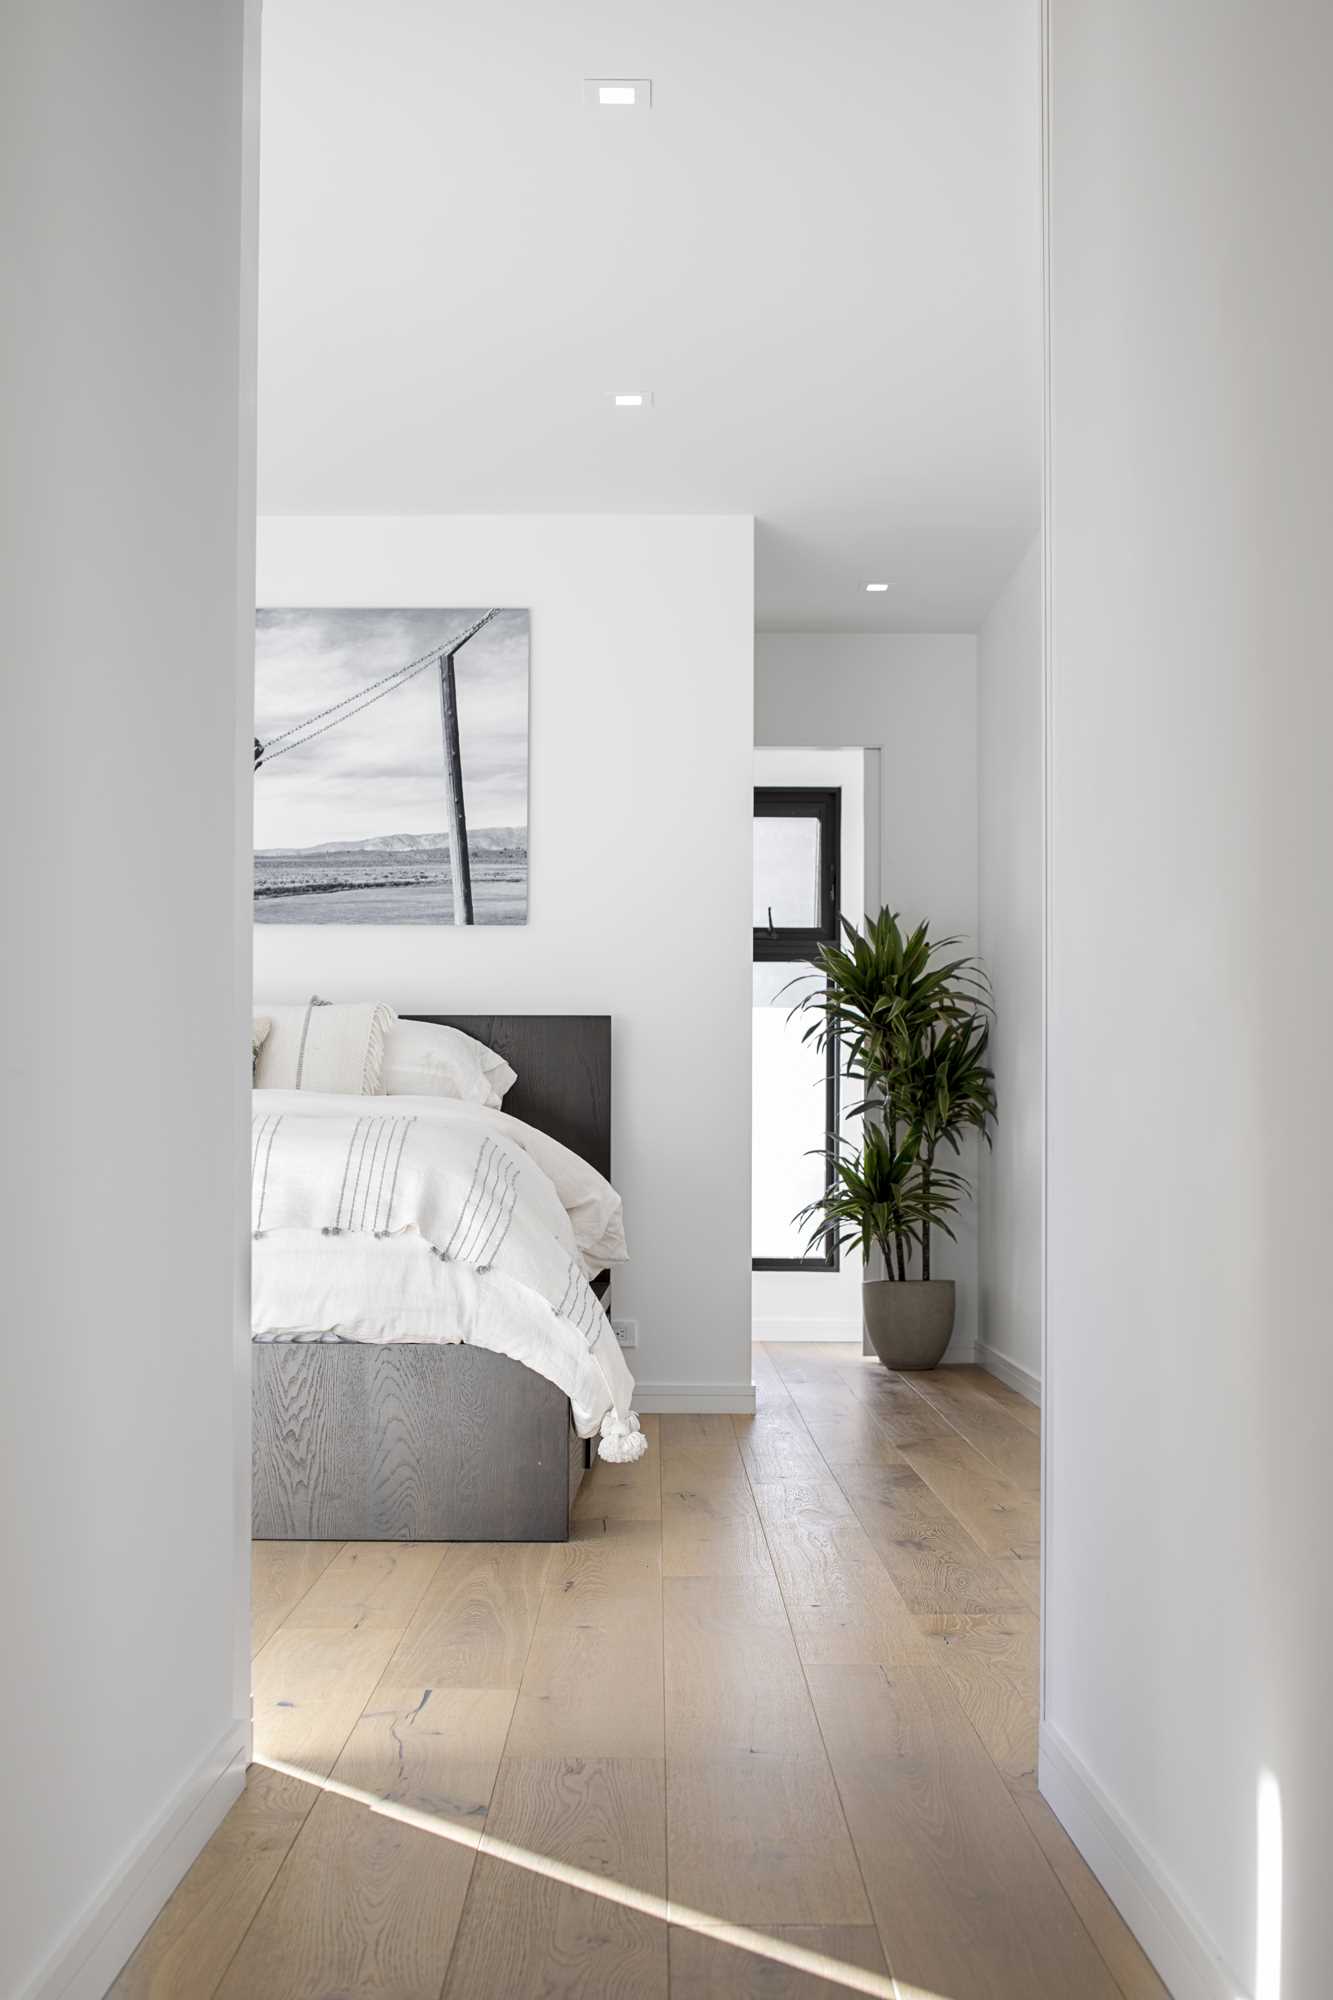 This bedroom is minimal in its design with white walls, while wood flooring adds a sense of warmth to the space.